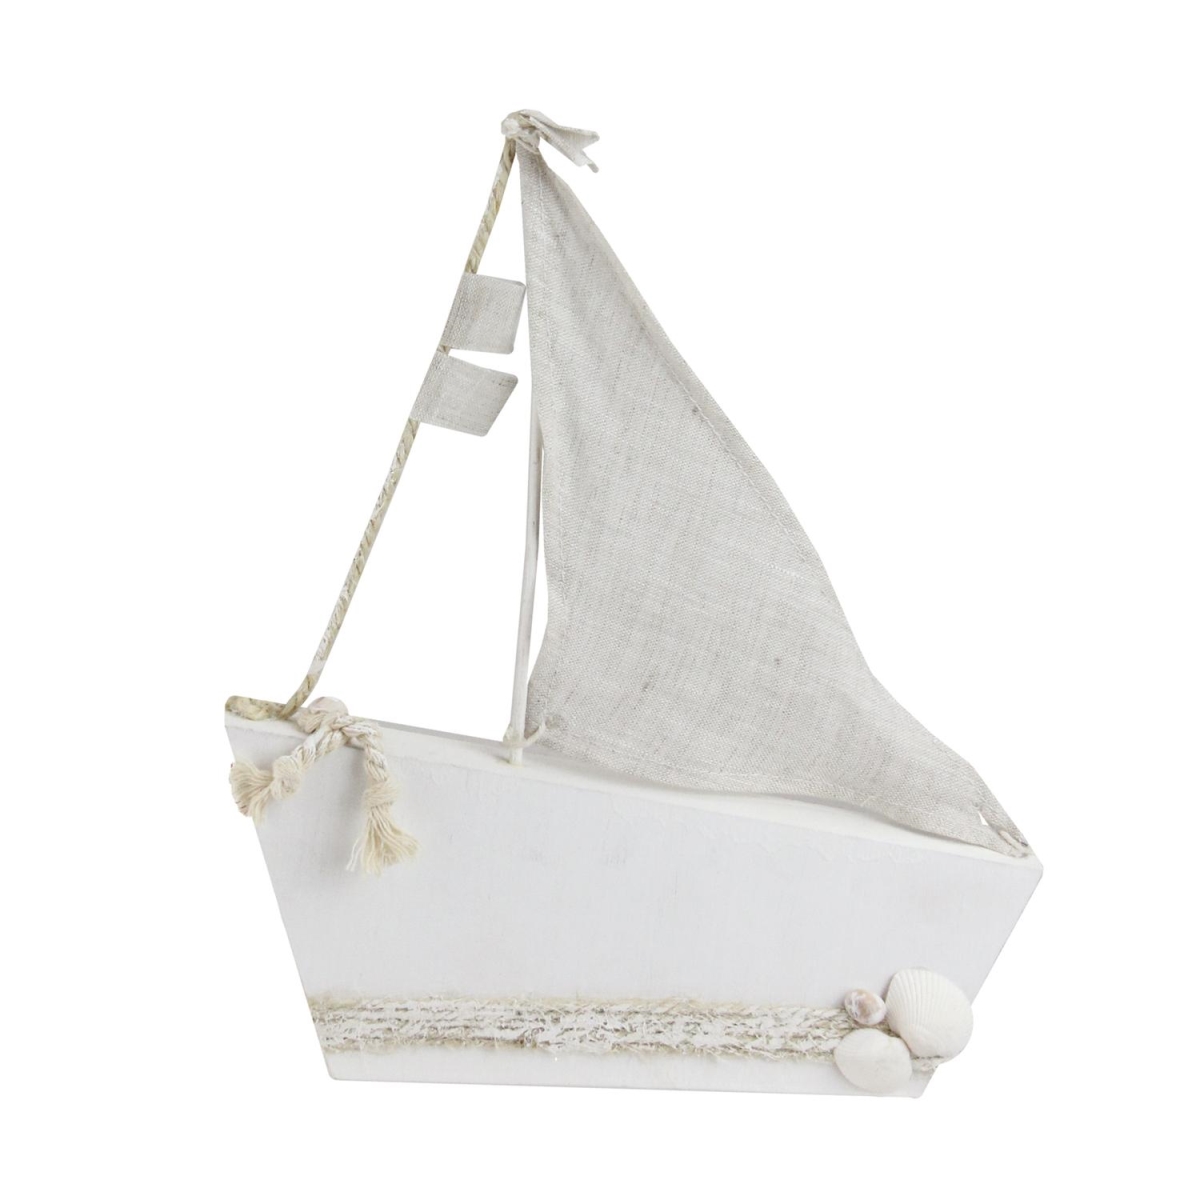 Picture of Northlight 32735194 11.25 in. White & Tan Cape Cod Inspired Ship with Sails Table Top Decoration